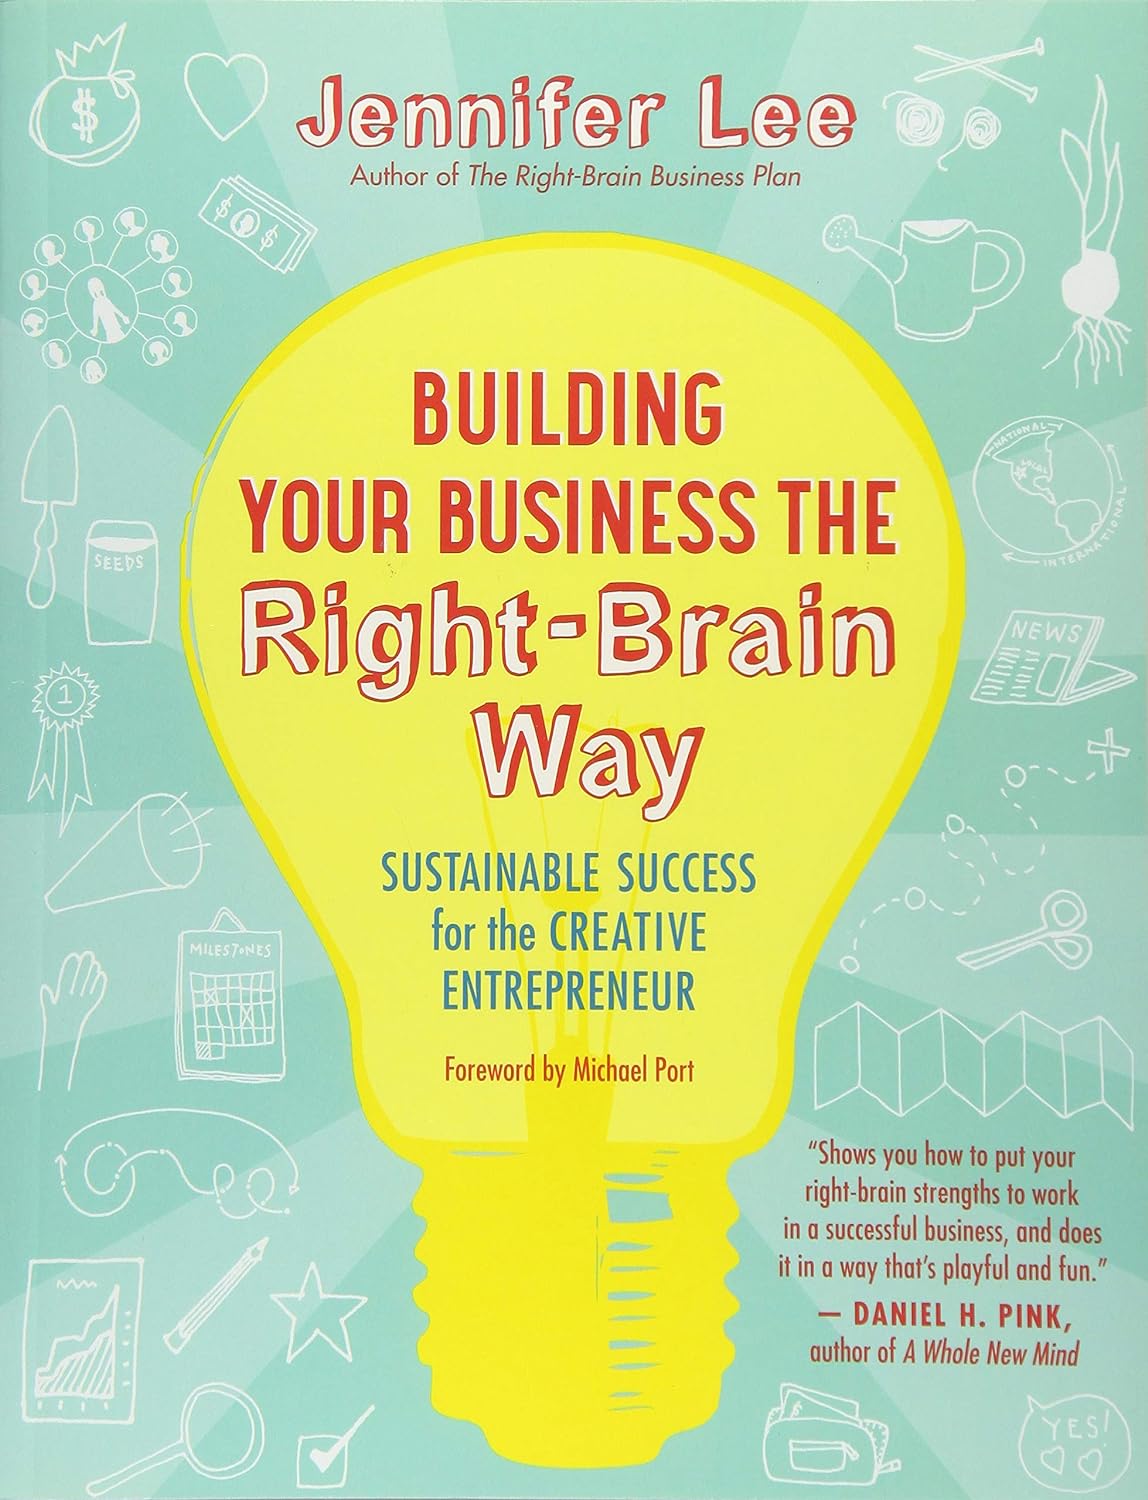 Building Your Business the Right-Brain Way: Sustainable Success for the Creative Entrepreneur Paperback – April 15, 2014